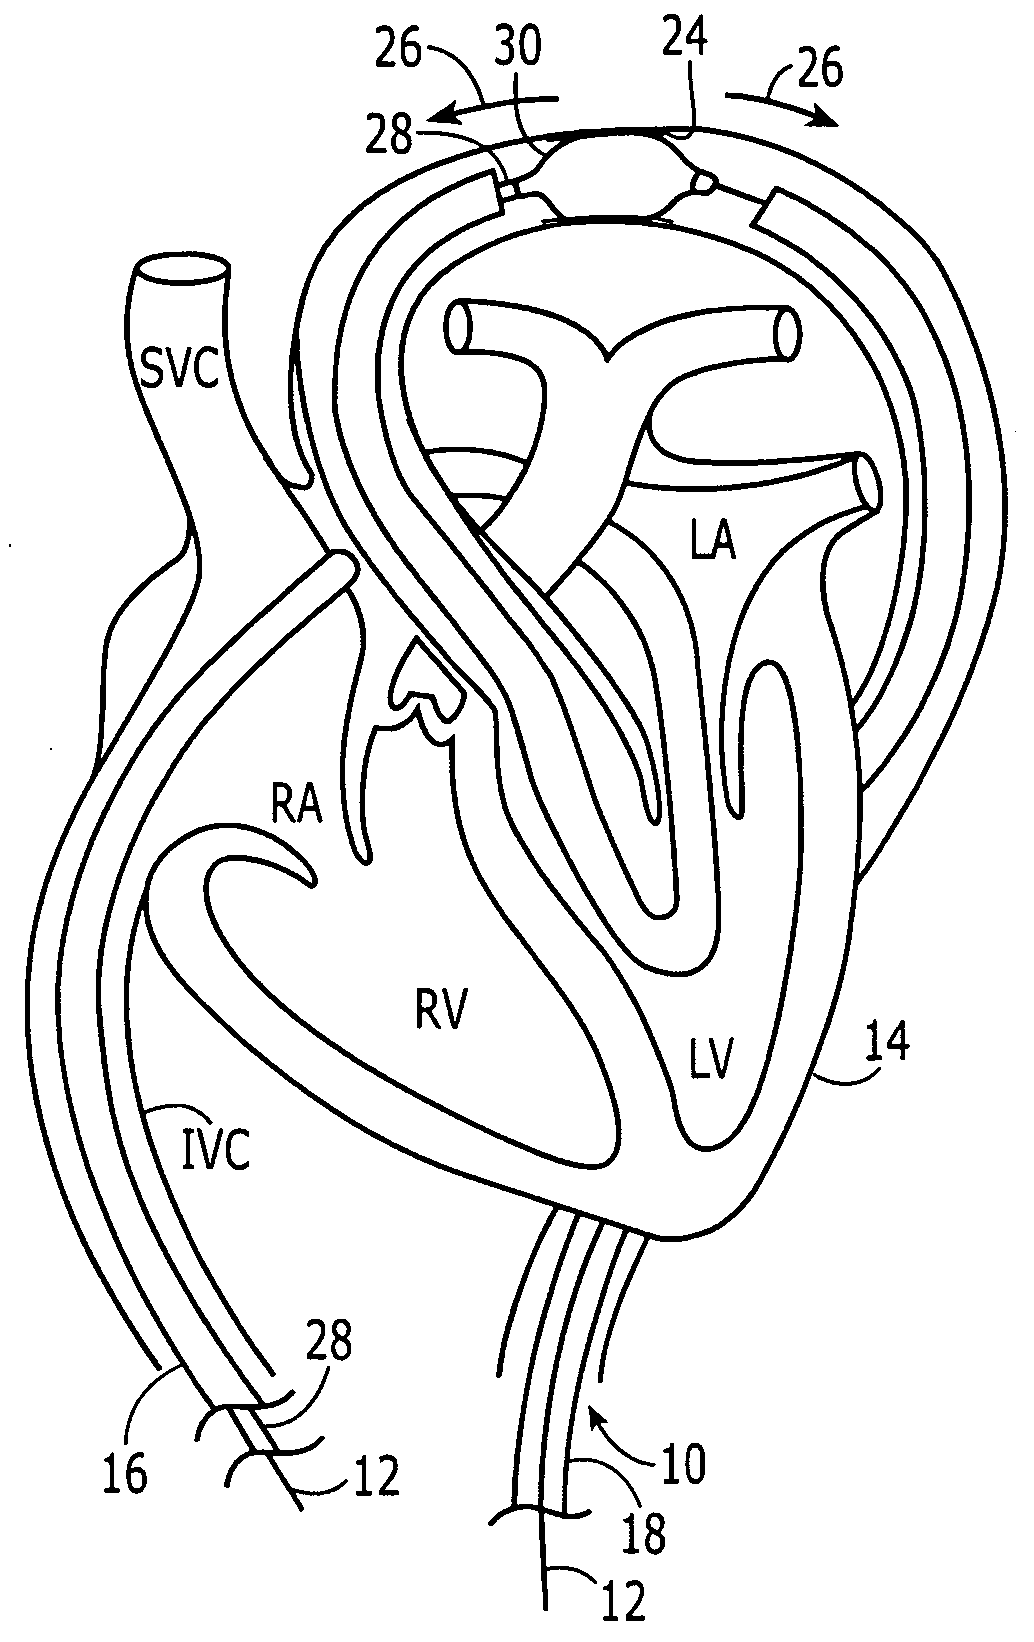 Separable sheath and method for insertion of a medical device into a bodily vessel using a separable sheath